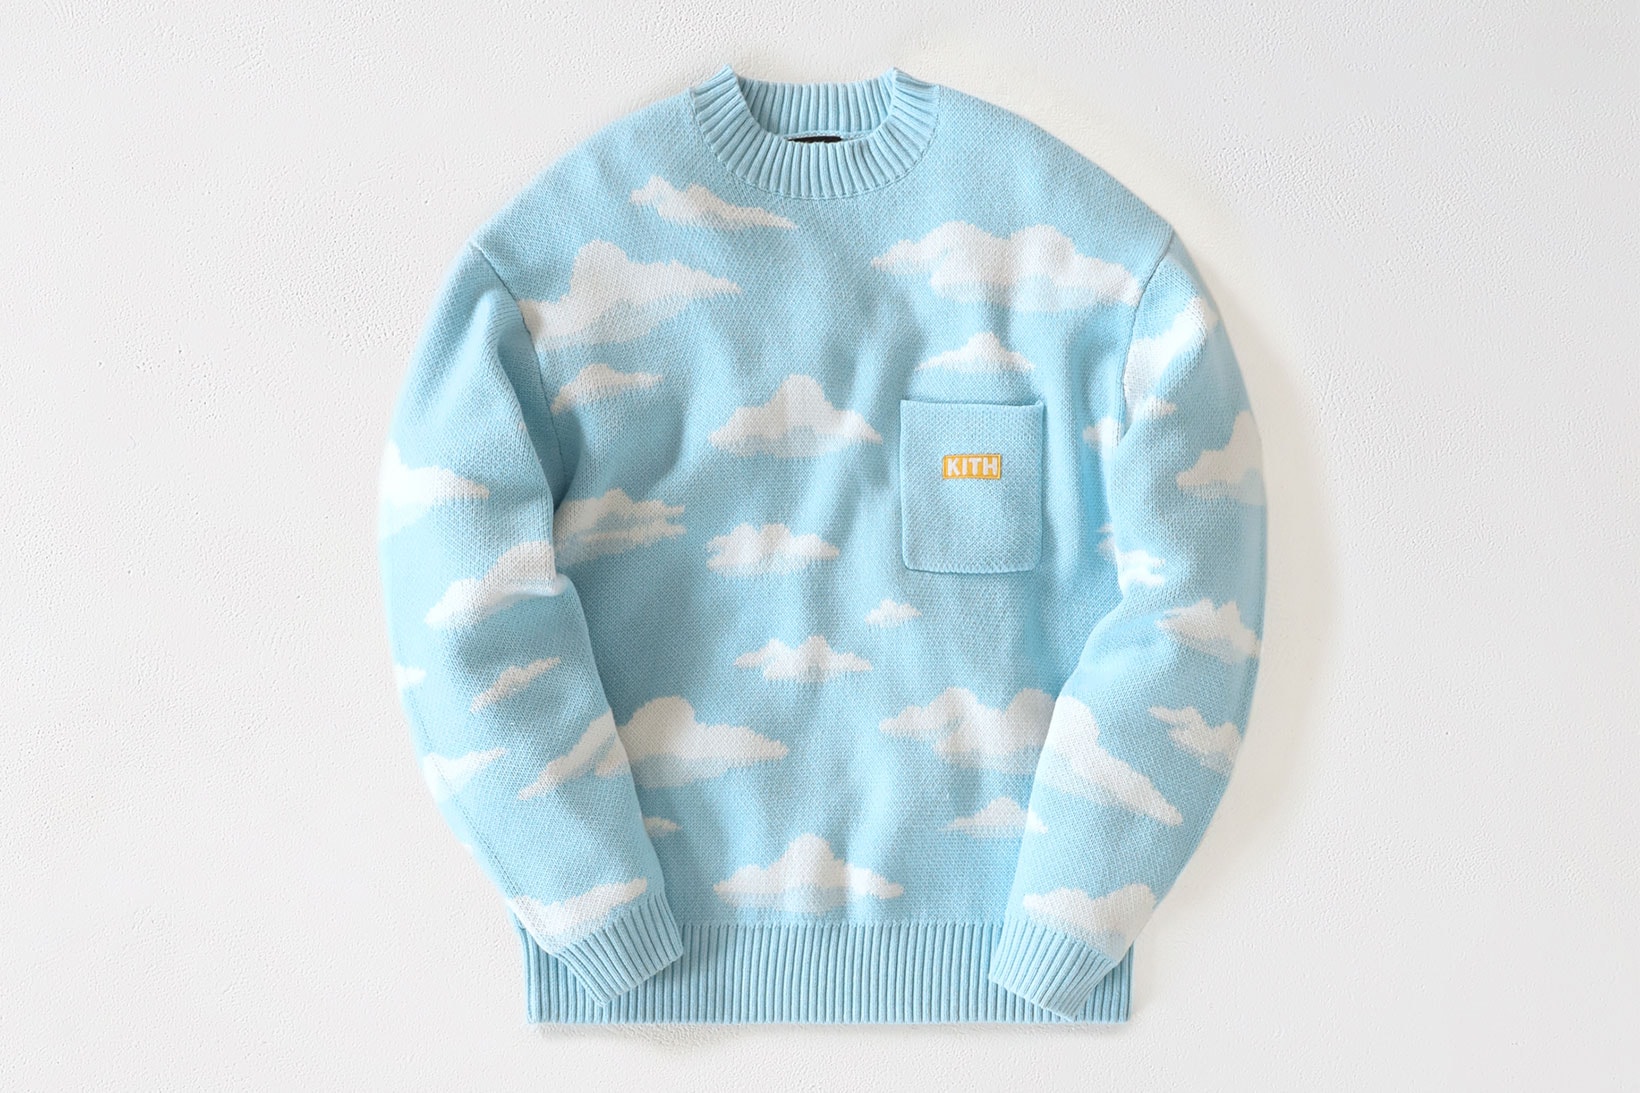 the simpsons kith collaboration knitwear sweater sky blue clouds logo